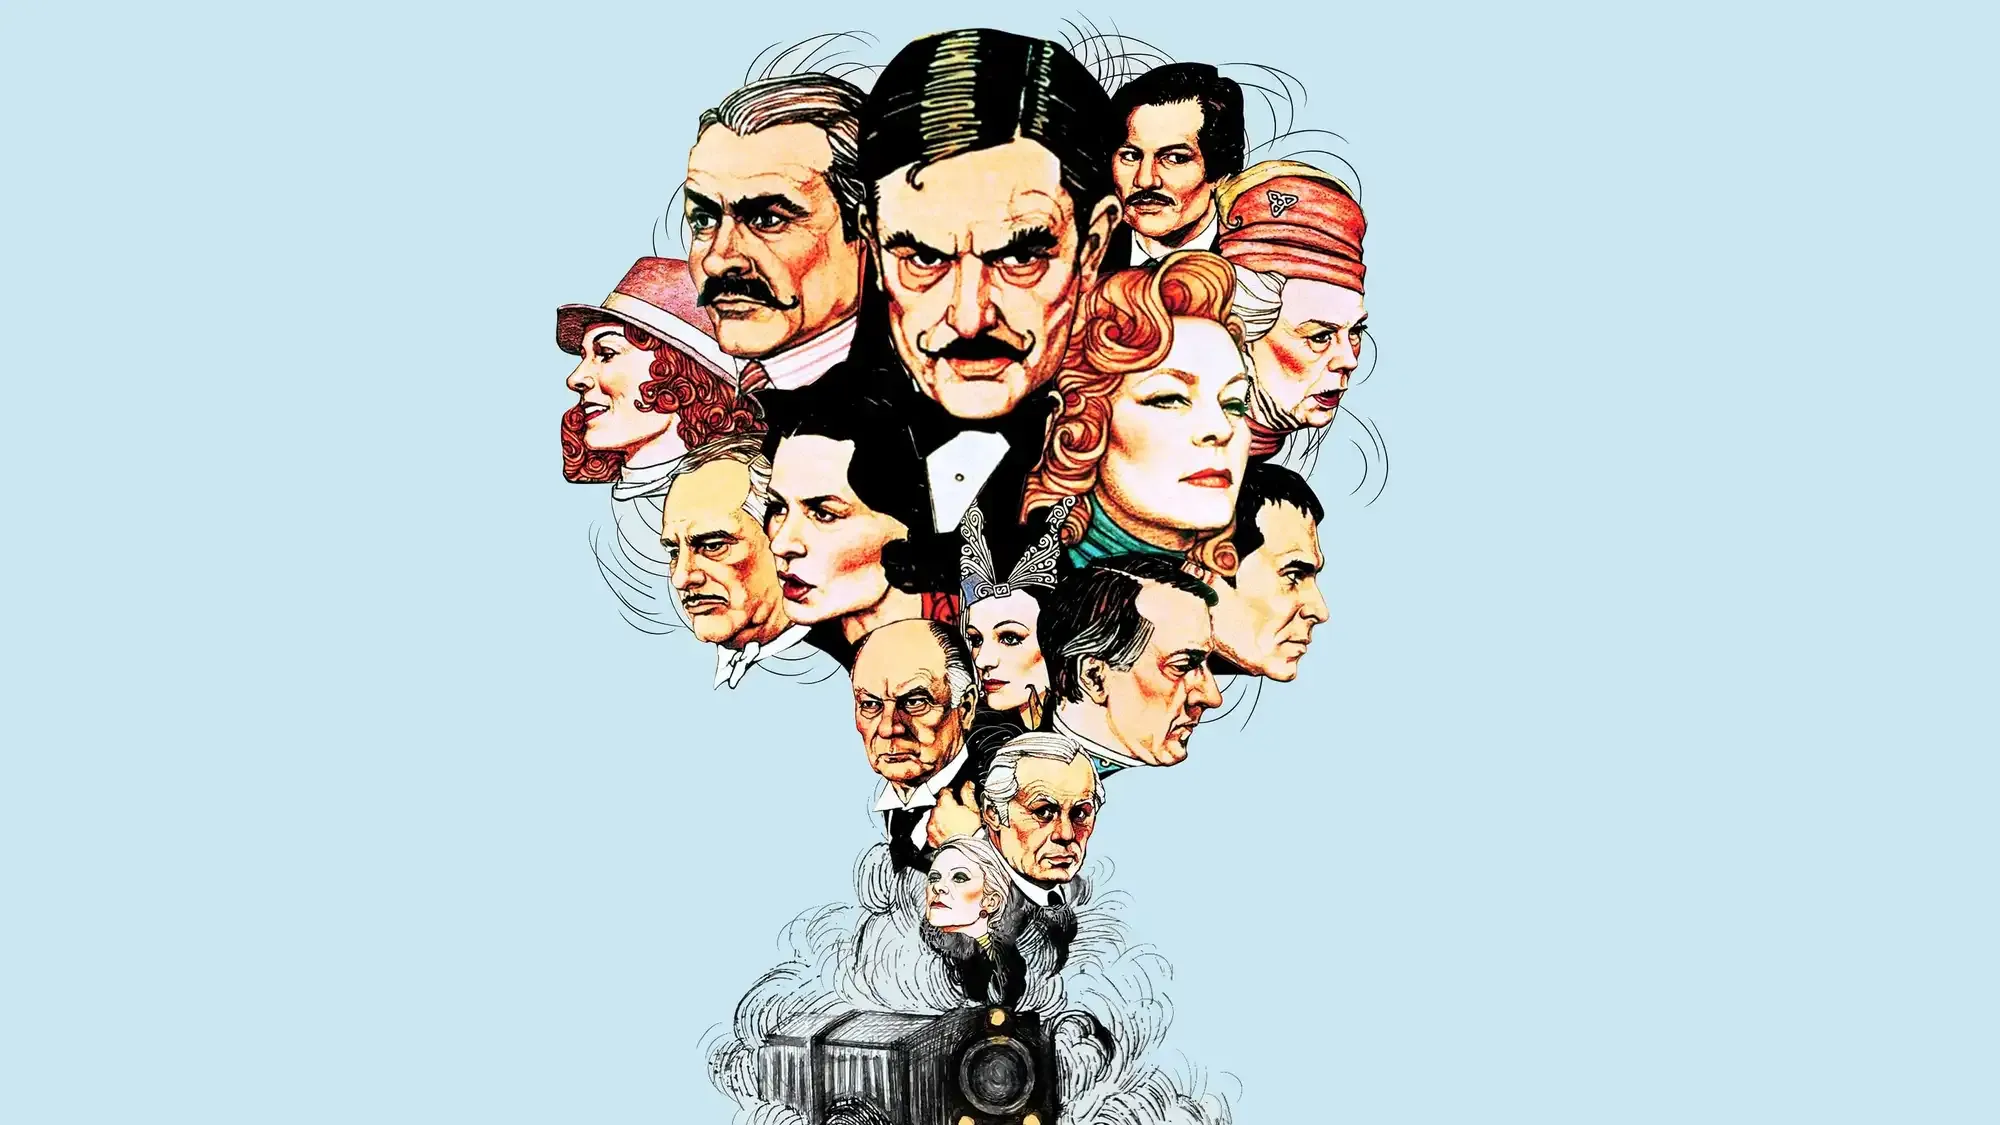 Murder on the Orient Express movie review